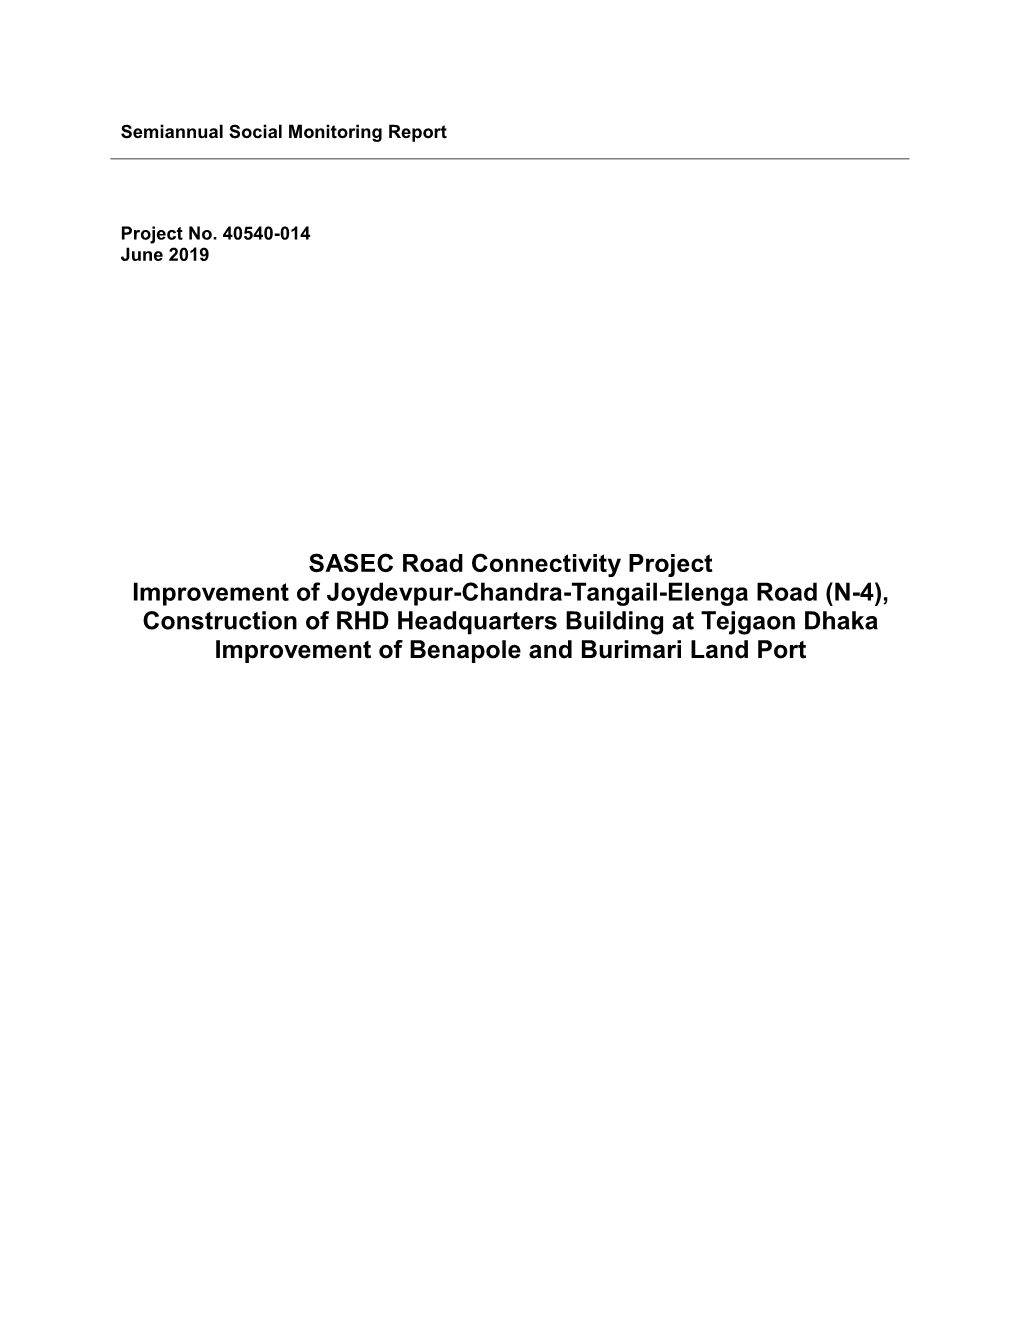 40540-014: SASEC Road Connectivity Project